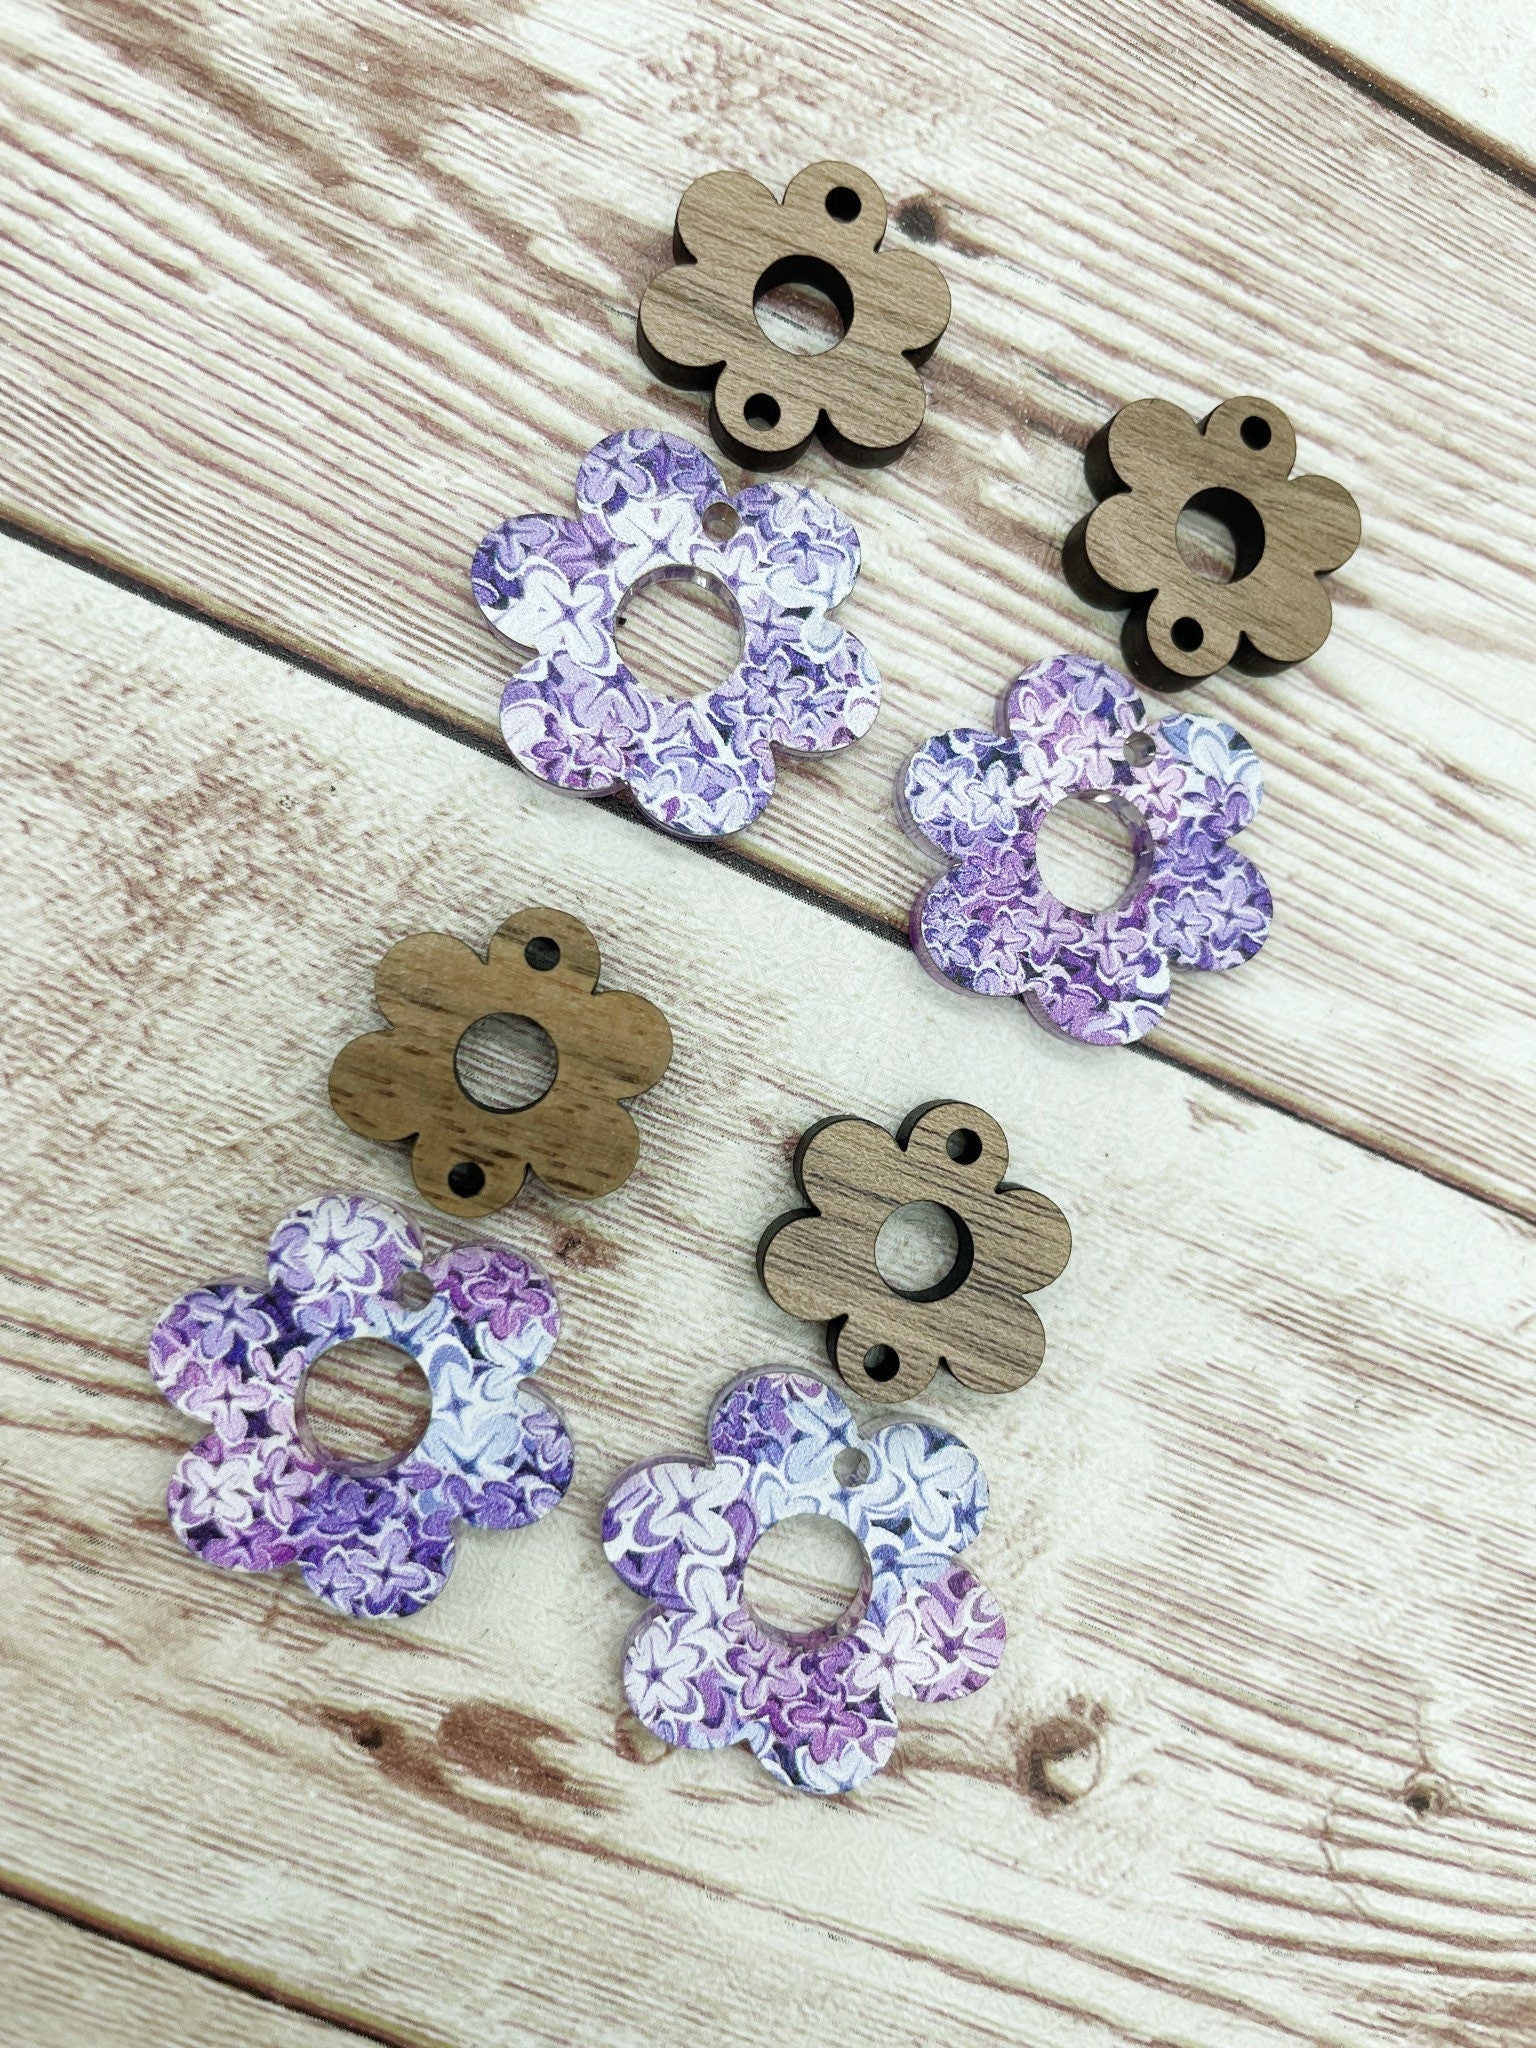 Patterned Lilac Acrylic and Wood Flower Connector Set Earring Blanks, DIY Jewelry Making